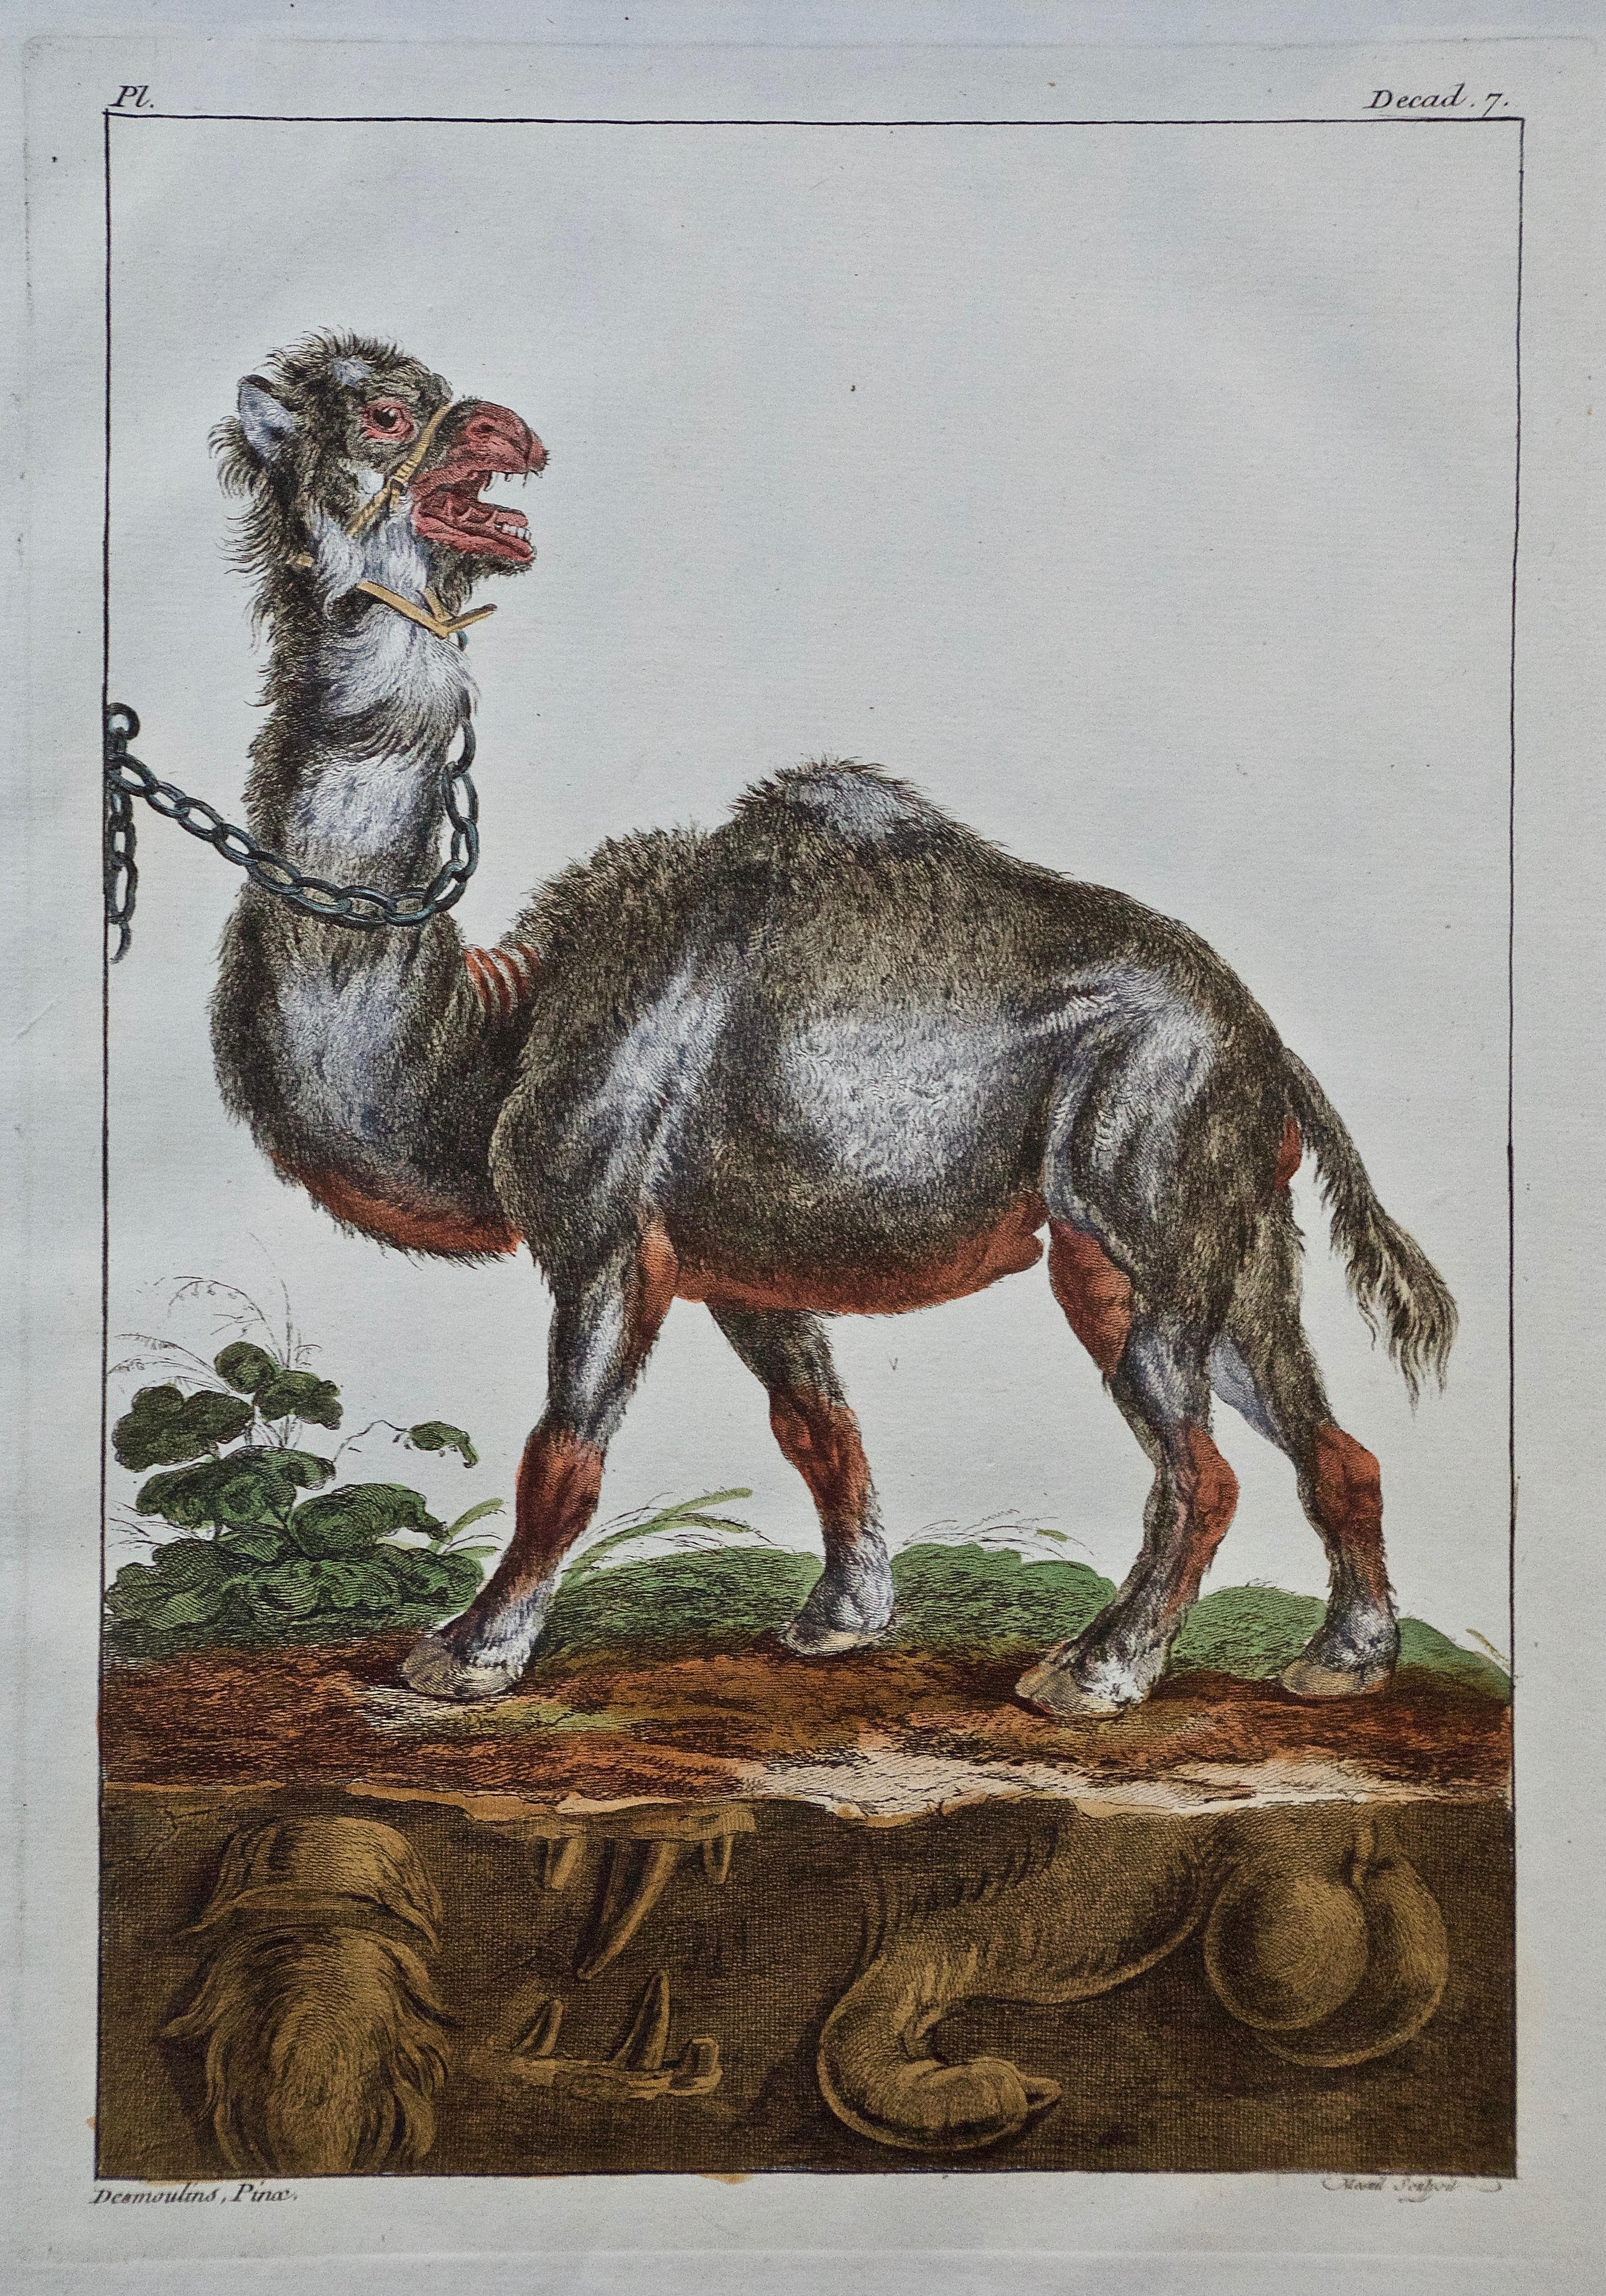 18th Century Hand Colored Engraving of a Camel from Pennant's 